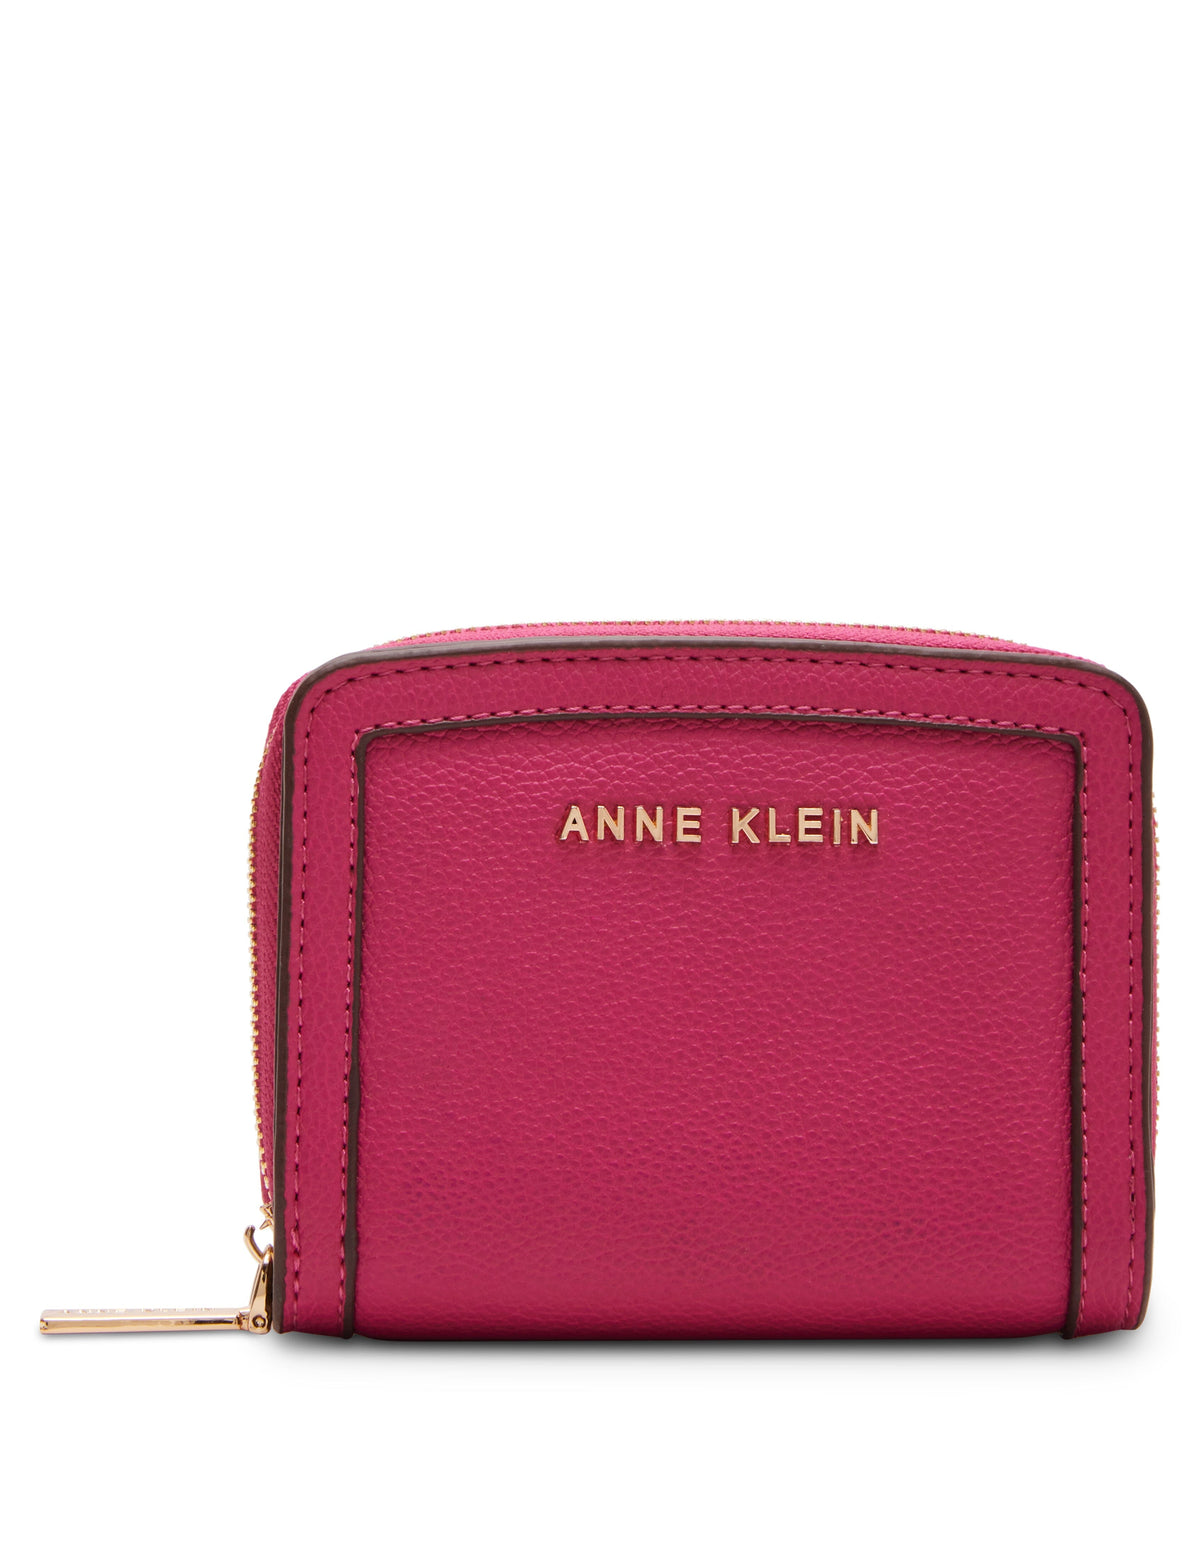 Anne Klein Hibiscus pink AK Small Curved Wallet